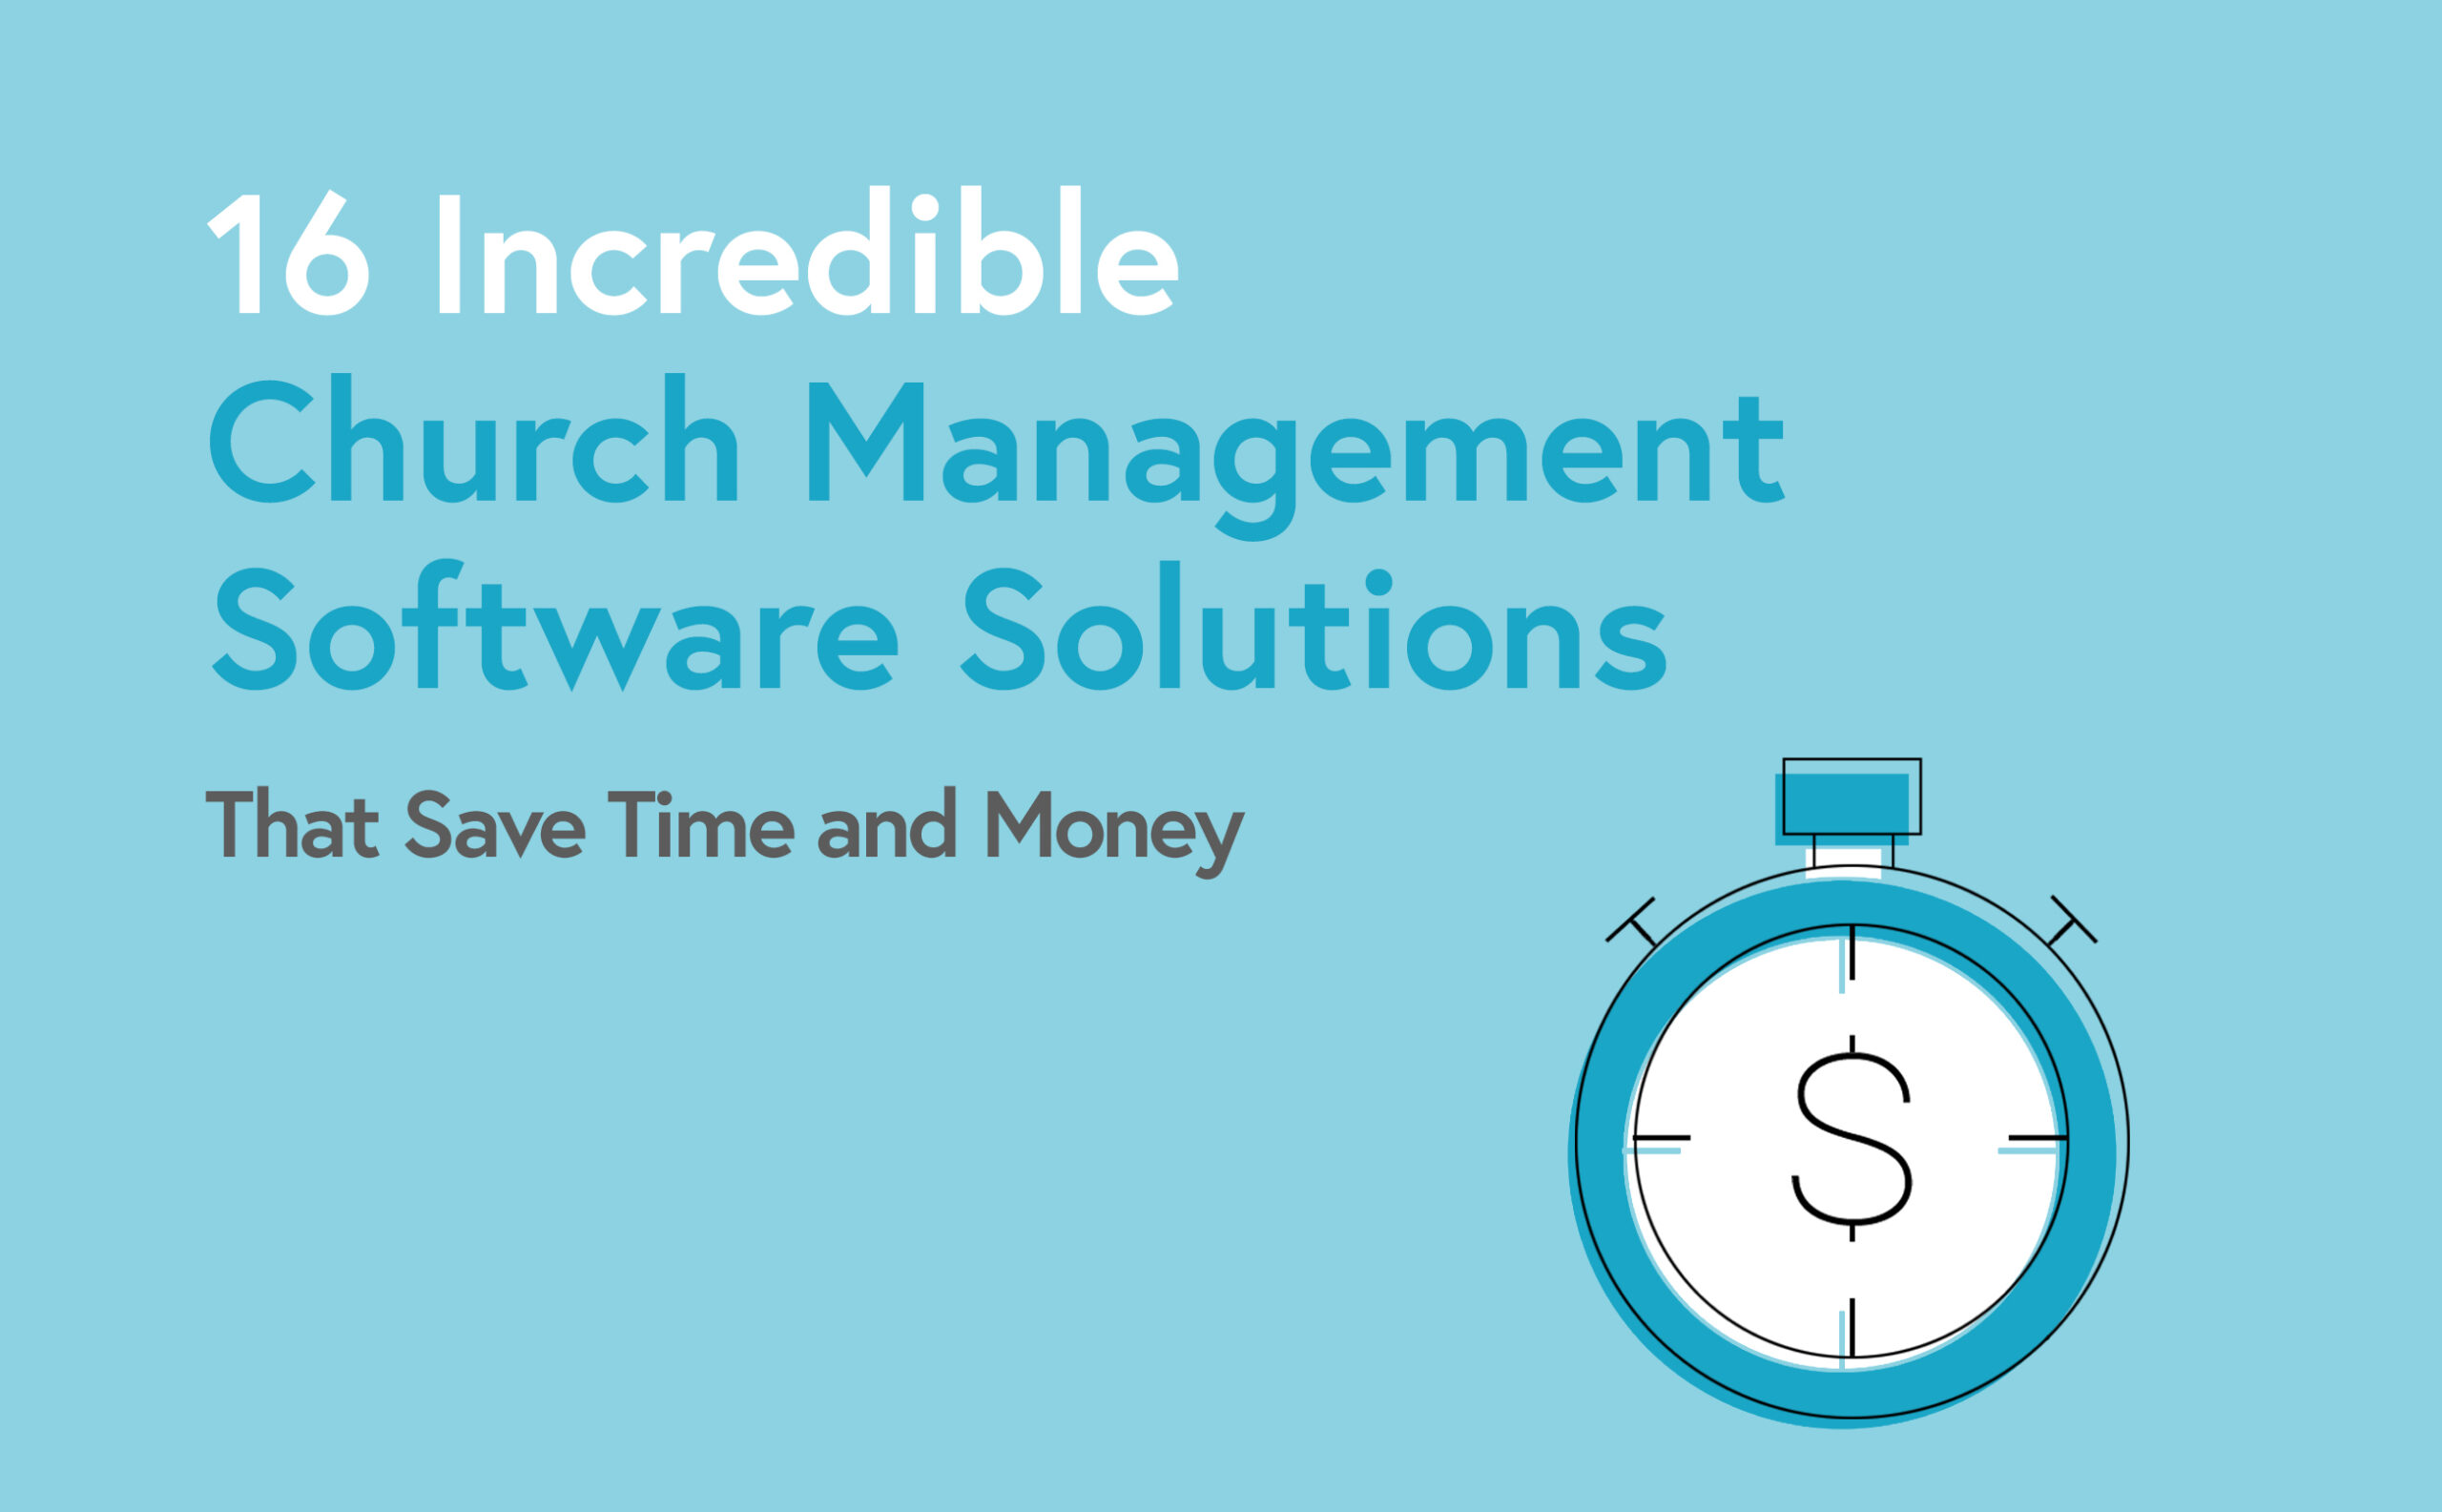 Church Management Software: the Best Options in 2022